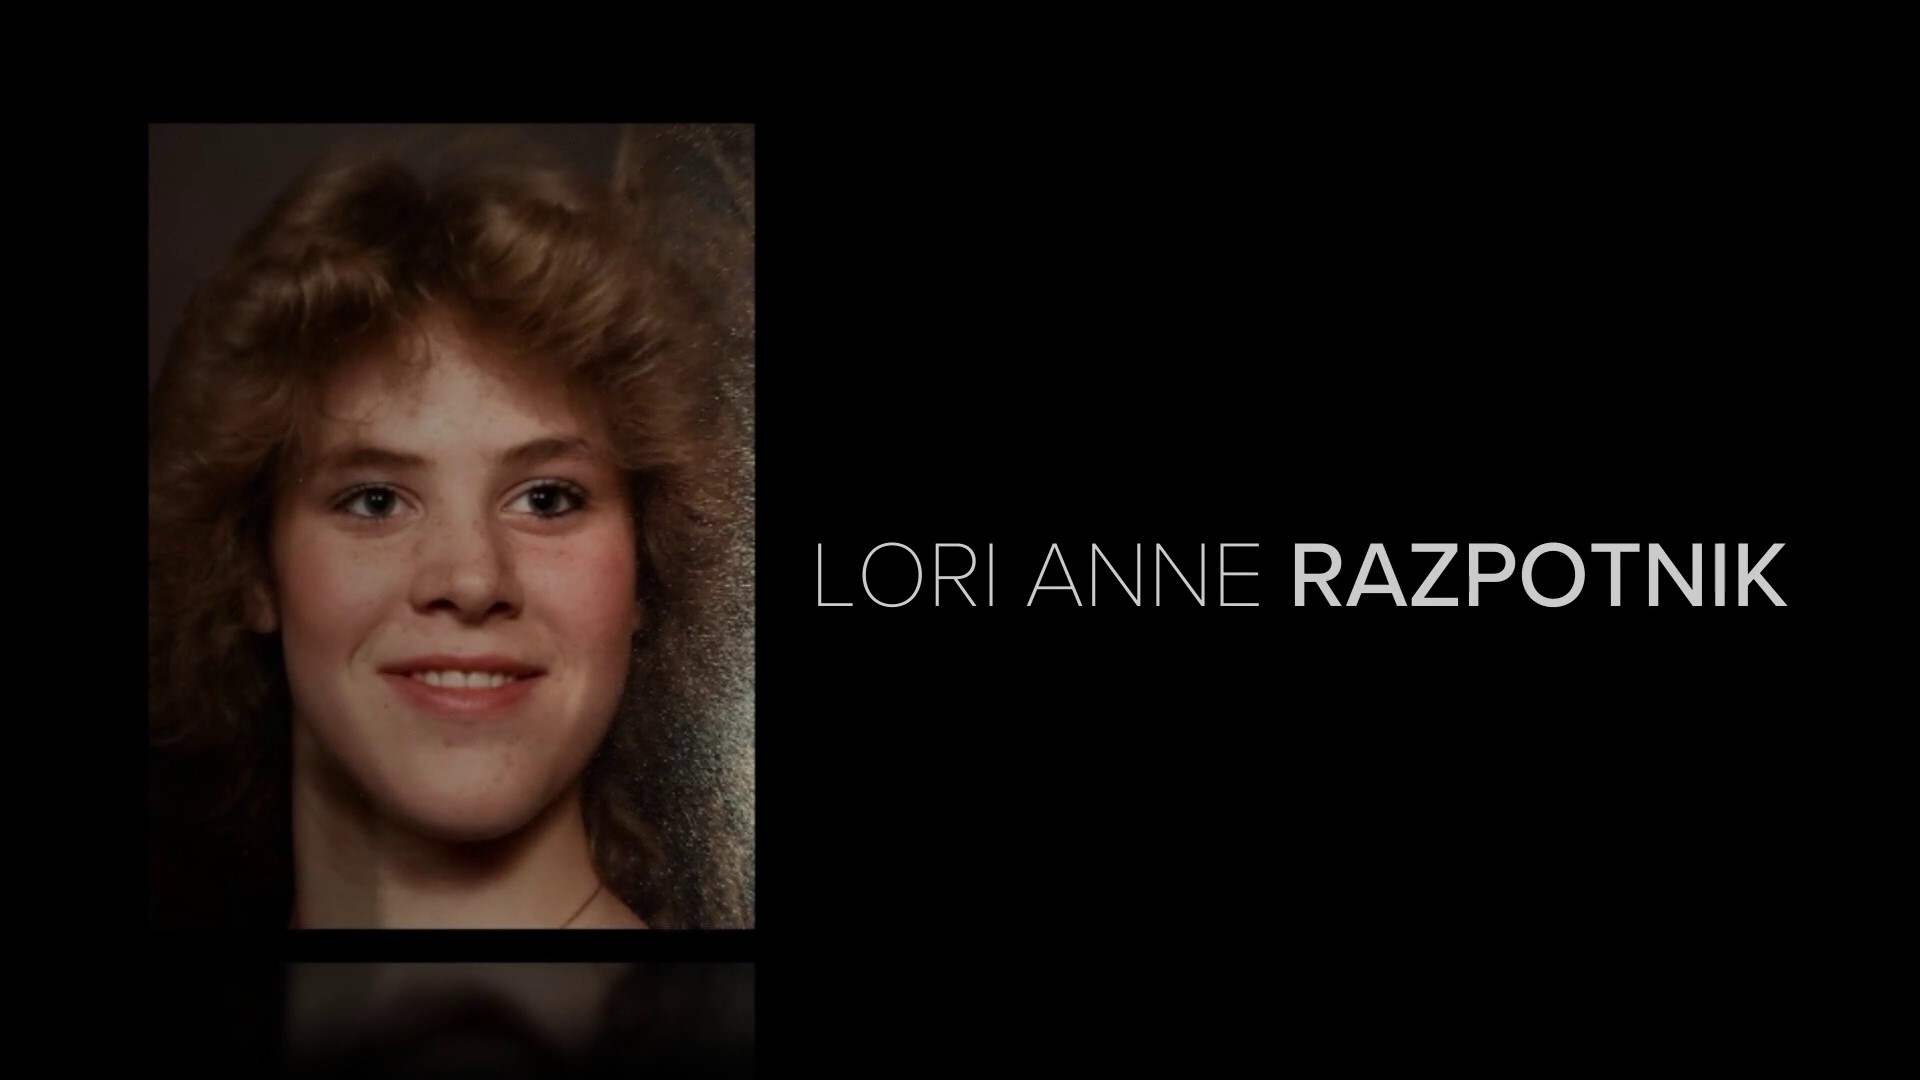 The remains were identified as Lori Anne Razpotnik who went missing in 1982 when she was just 15 years old.